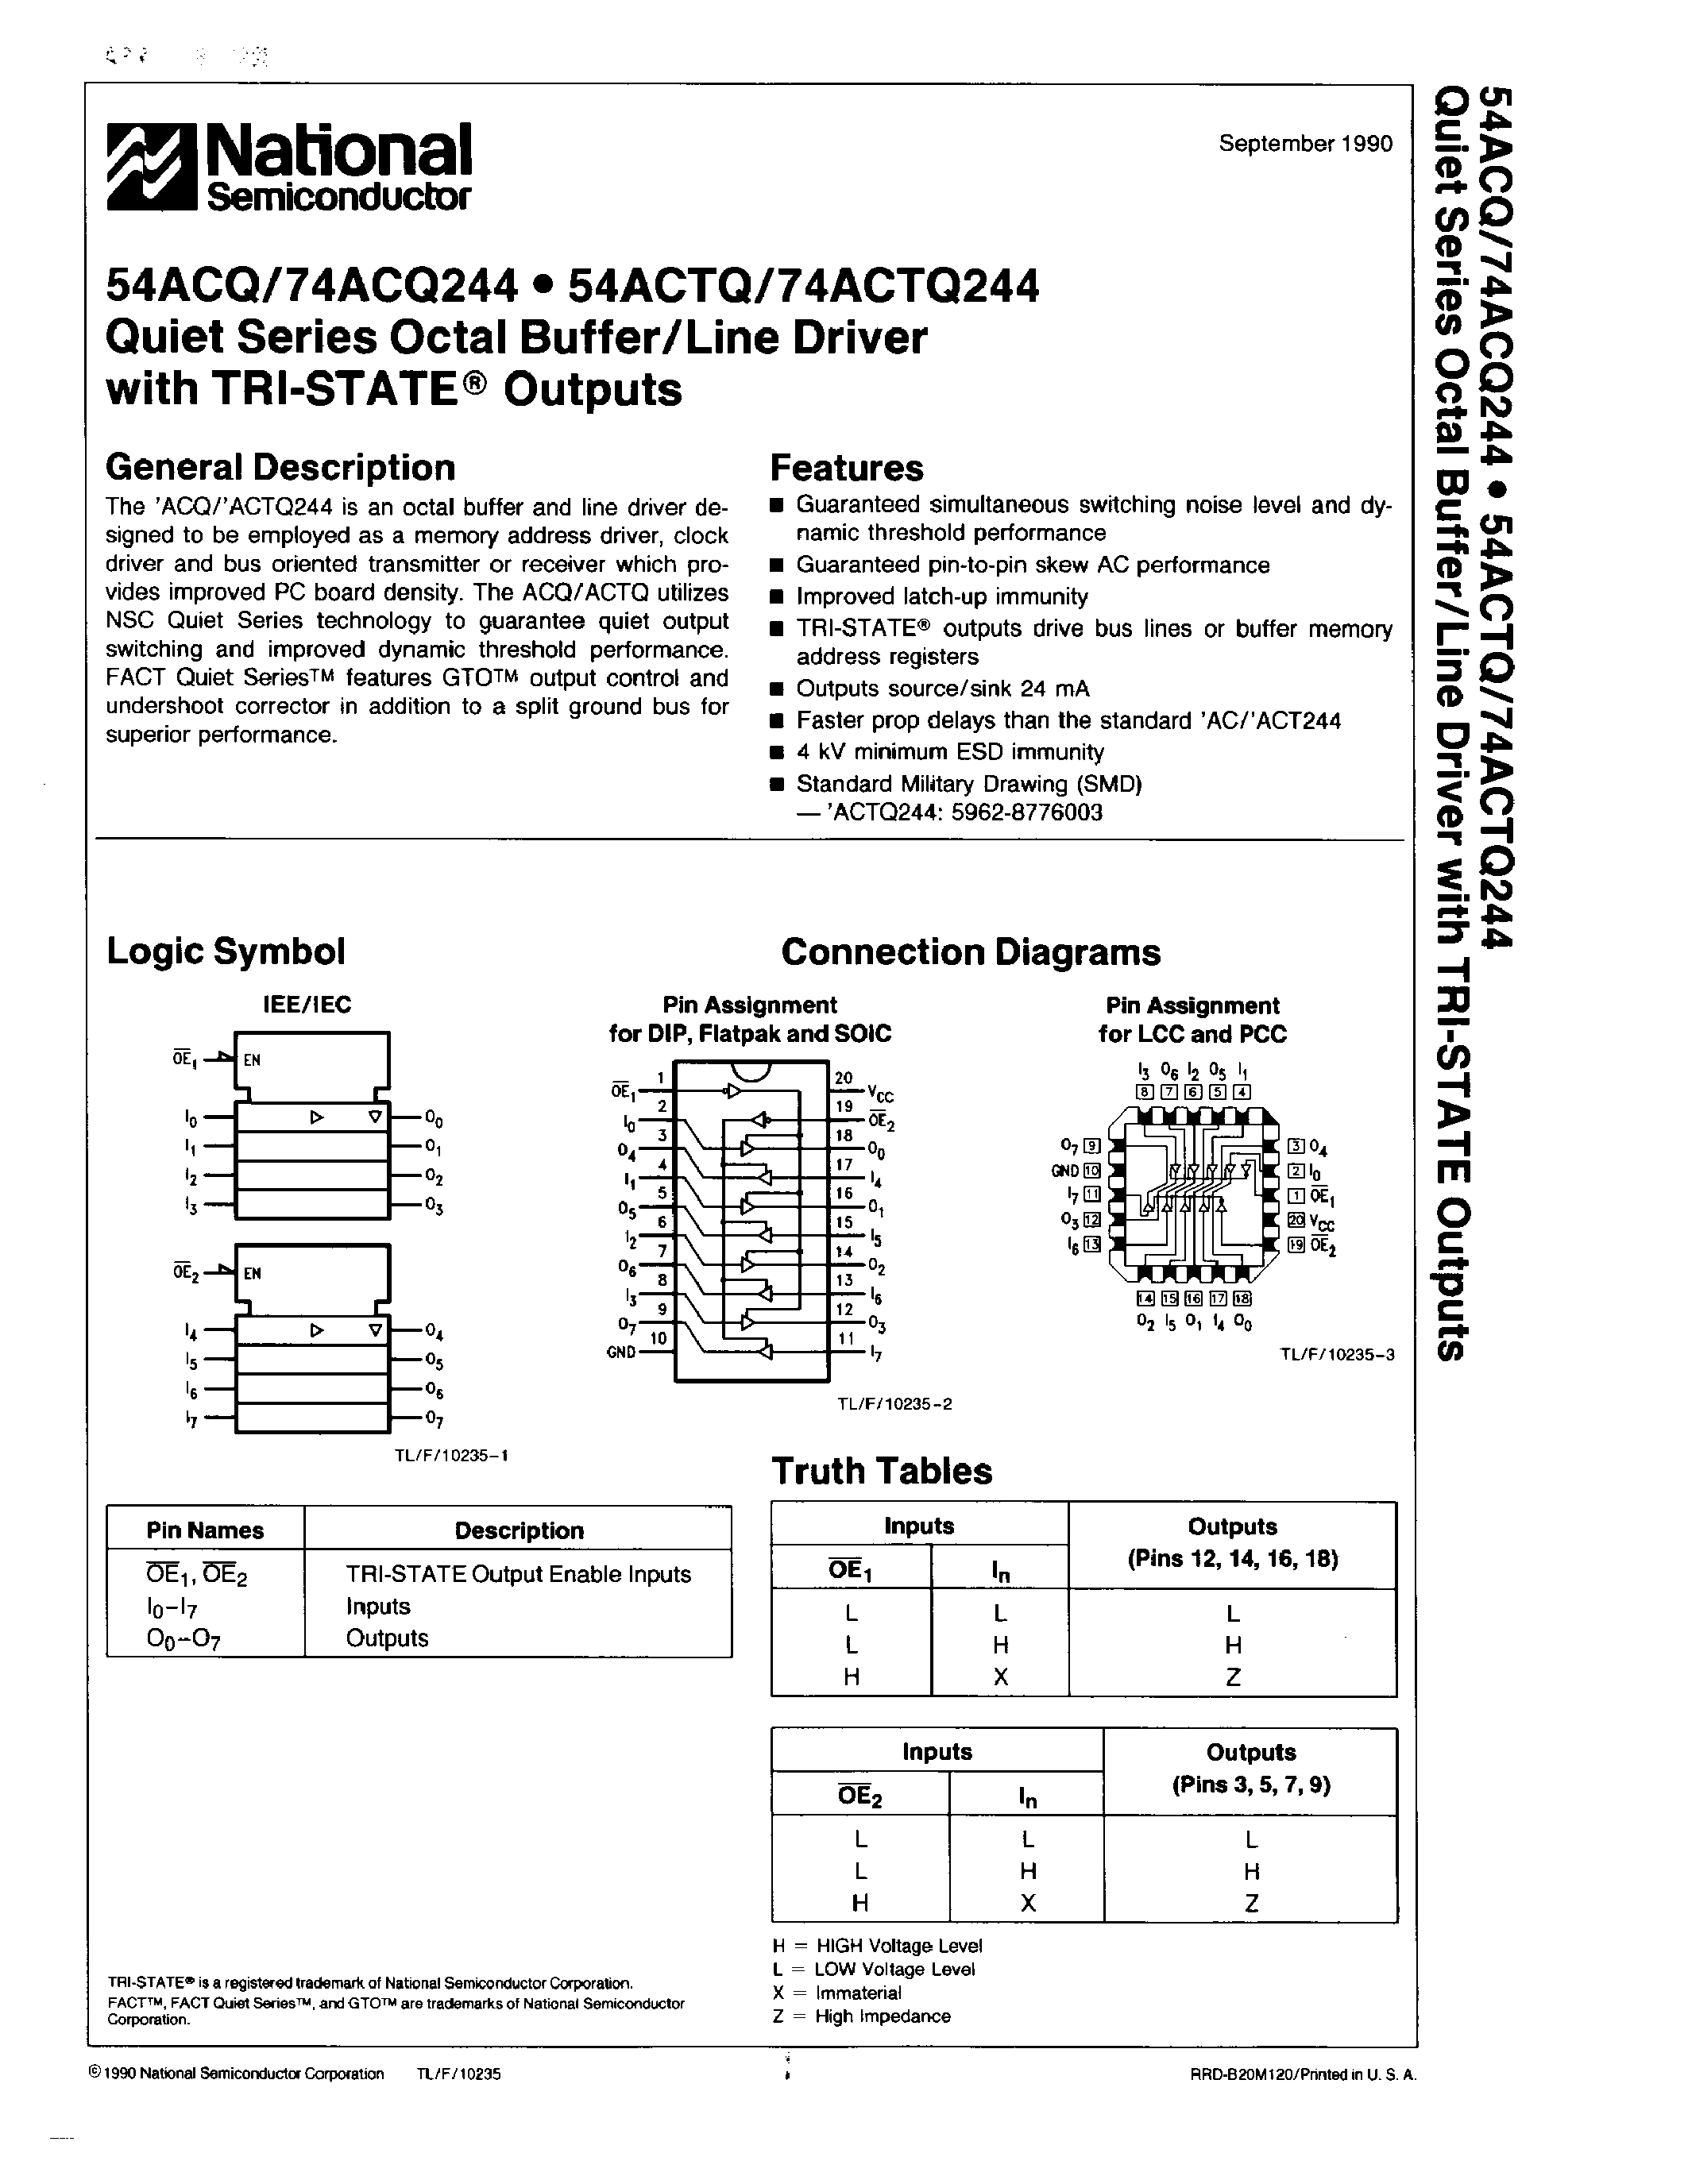 Datasheet 74ACQ244S - Quiet Seres Octal Buffer/Line Driver with TRI-STATE Outputs page 1